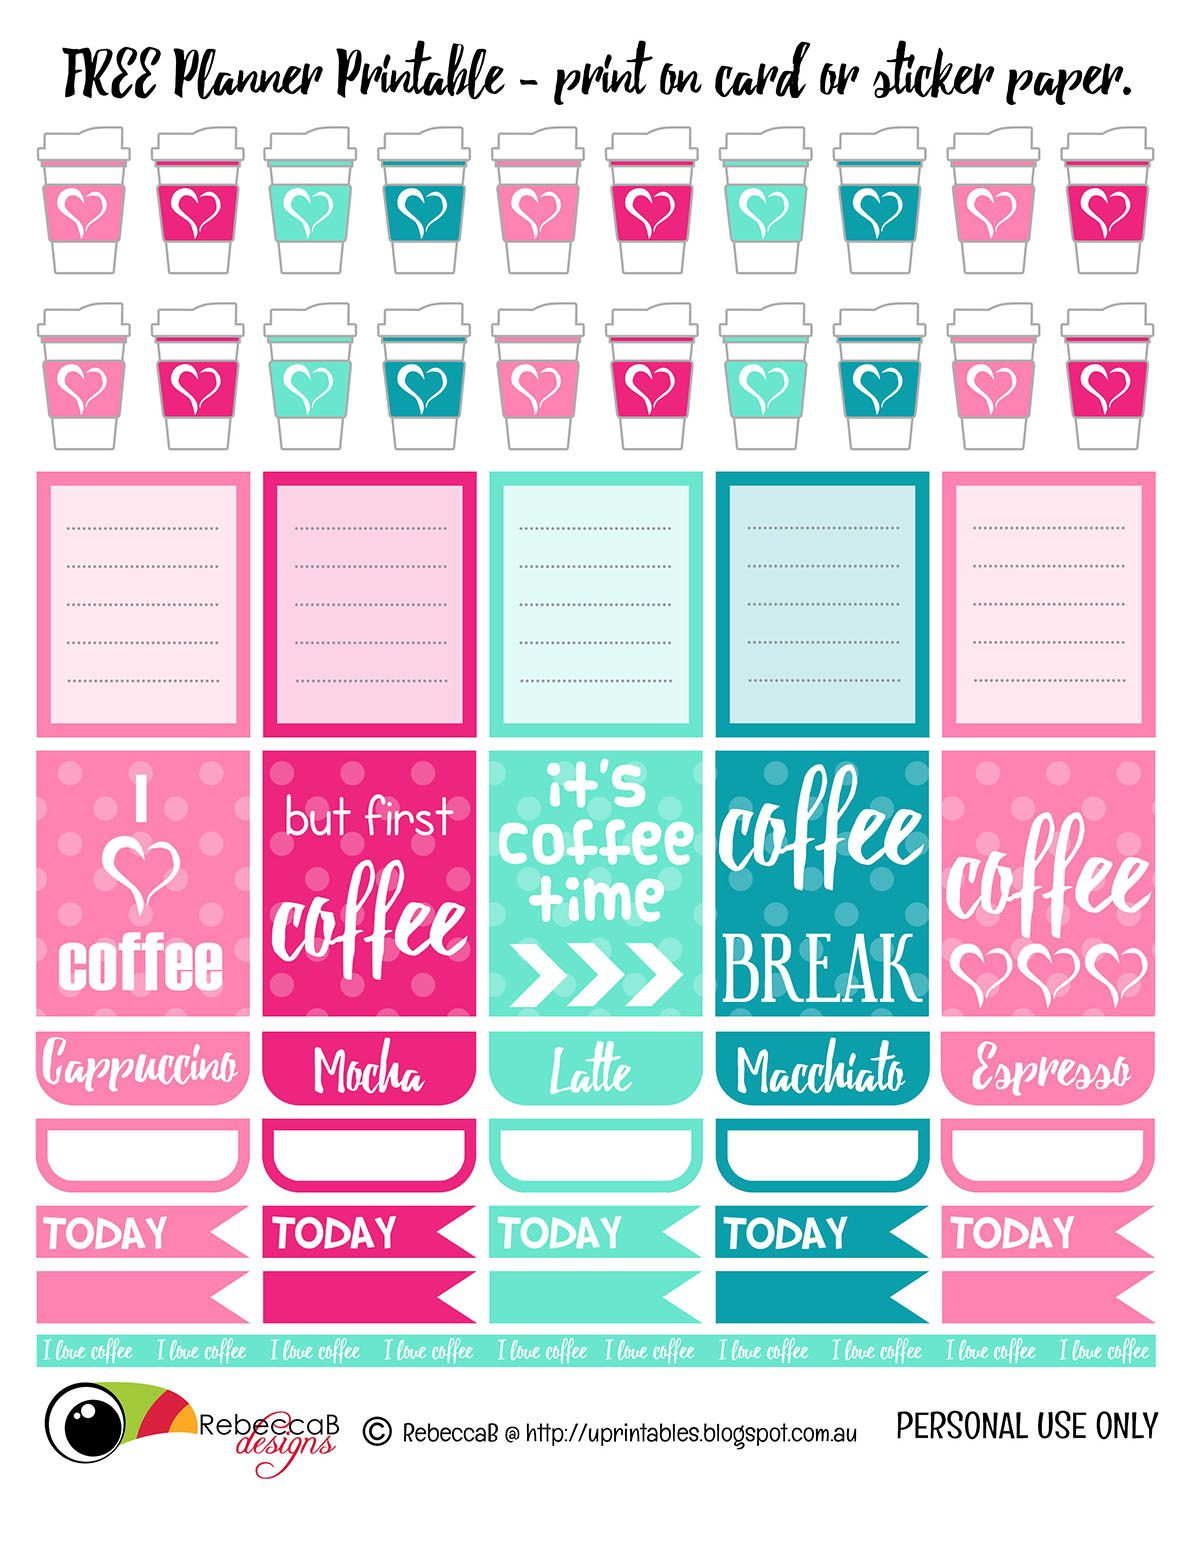 Free Printable Planner Stickers - Coffee. Print These Planner - Free Printable Card Stock Paper